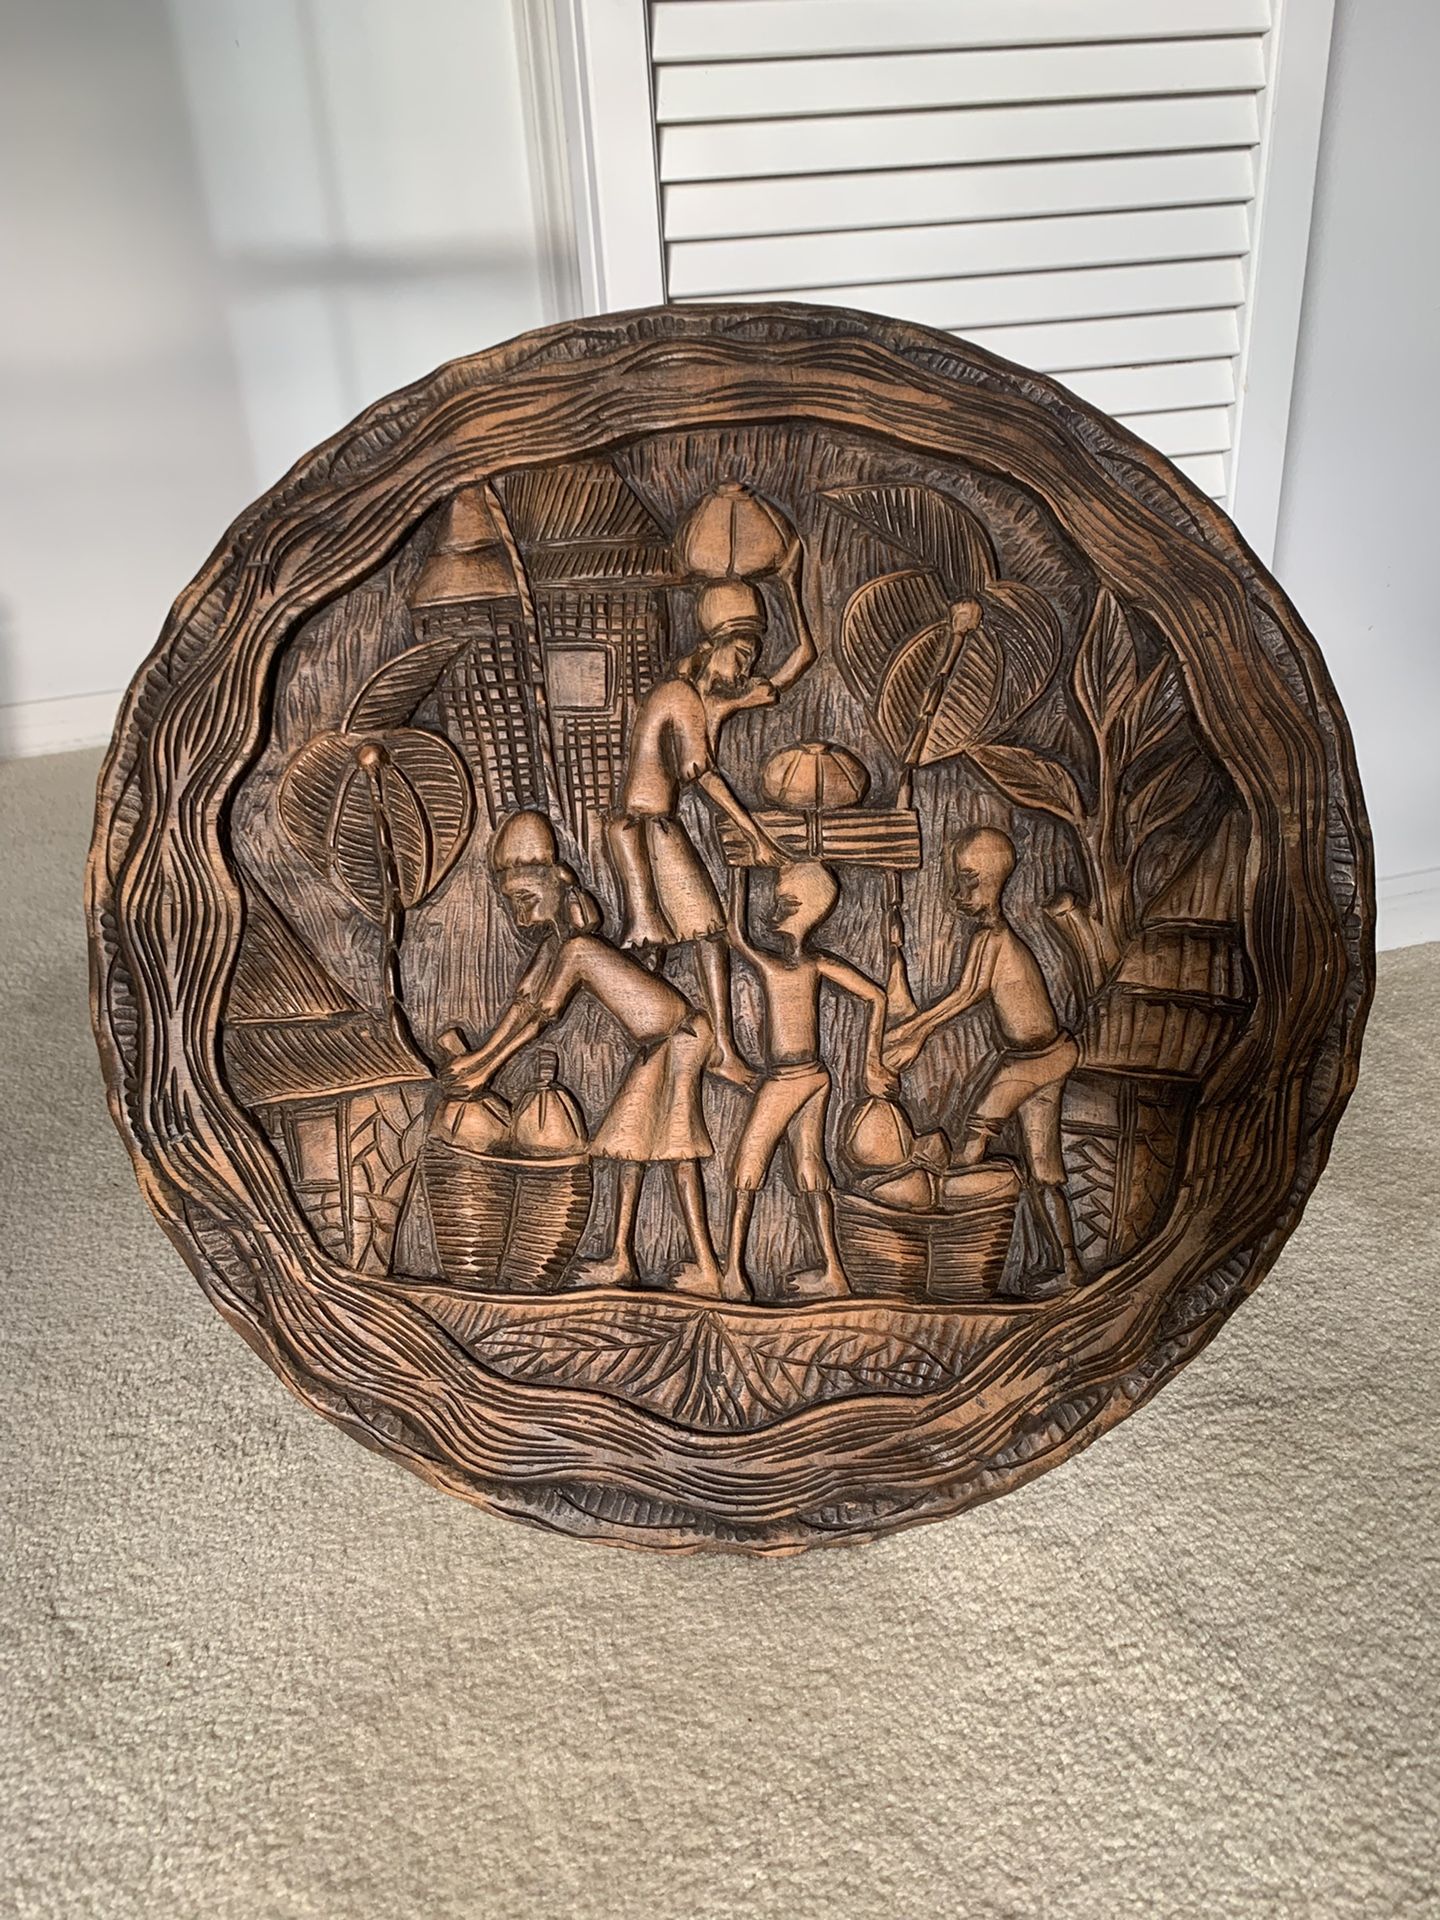 Handcarved wooden Artwork. Mountain made in Haiti.